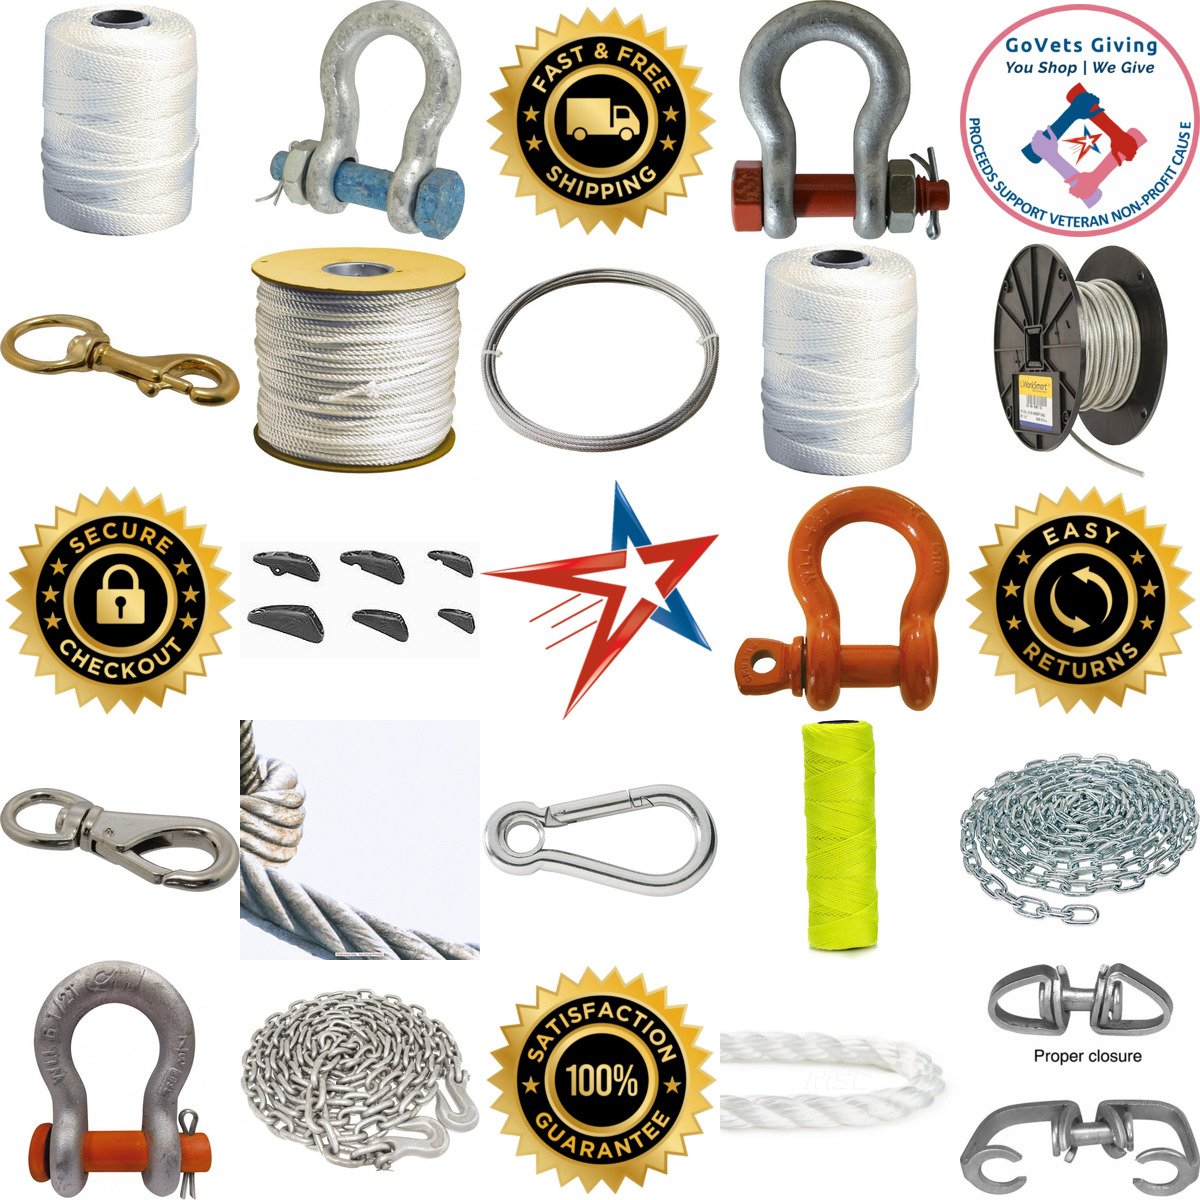 A selection of Chain Rope Wire Rope and Hardware products on GoVets